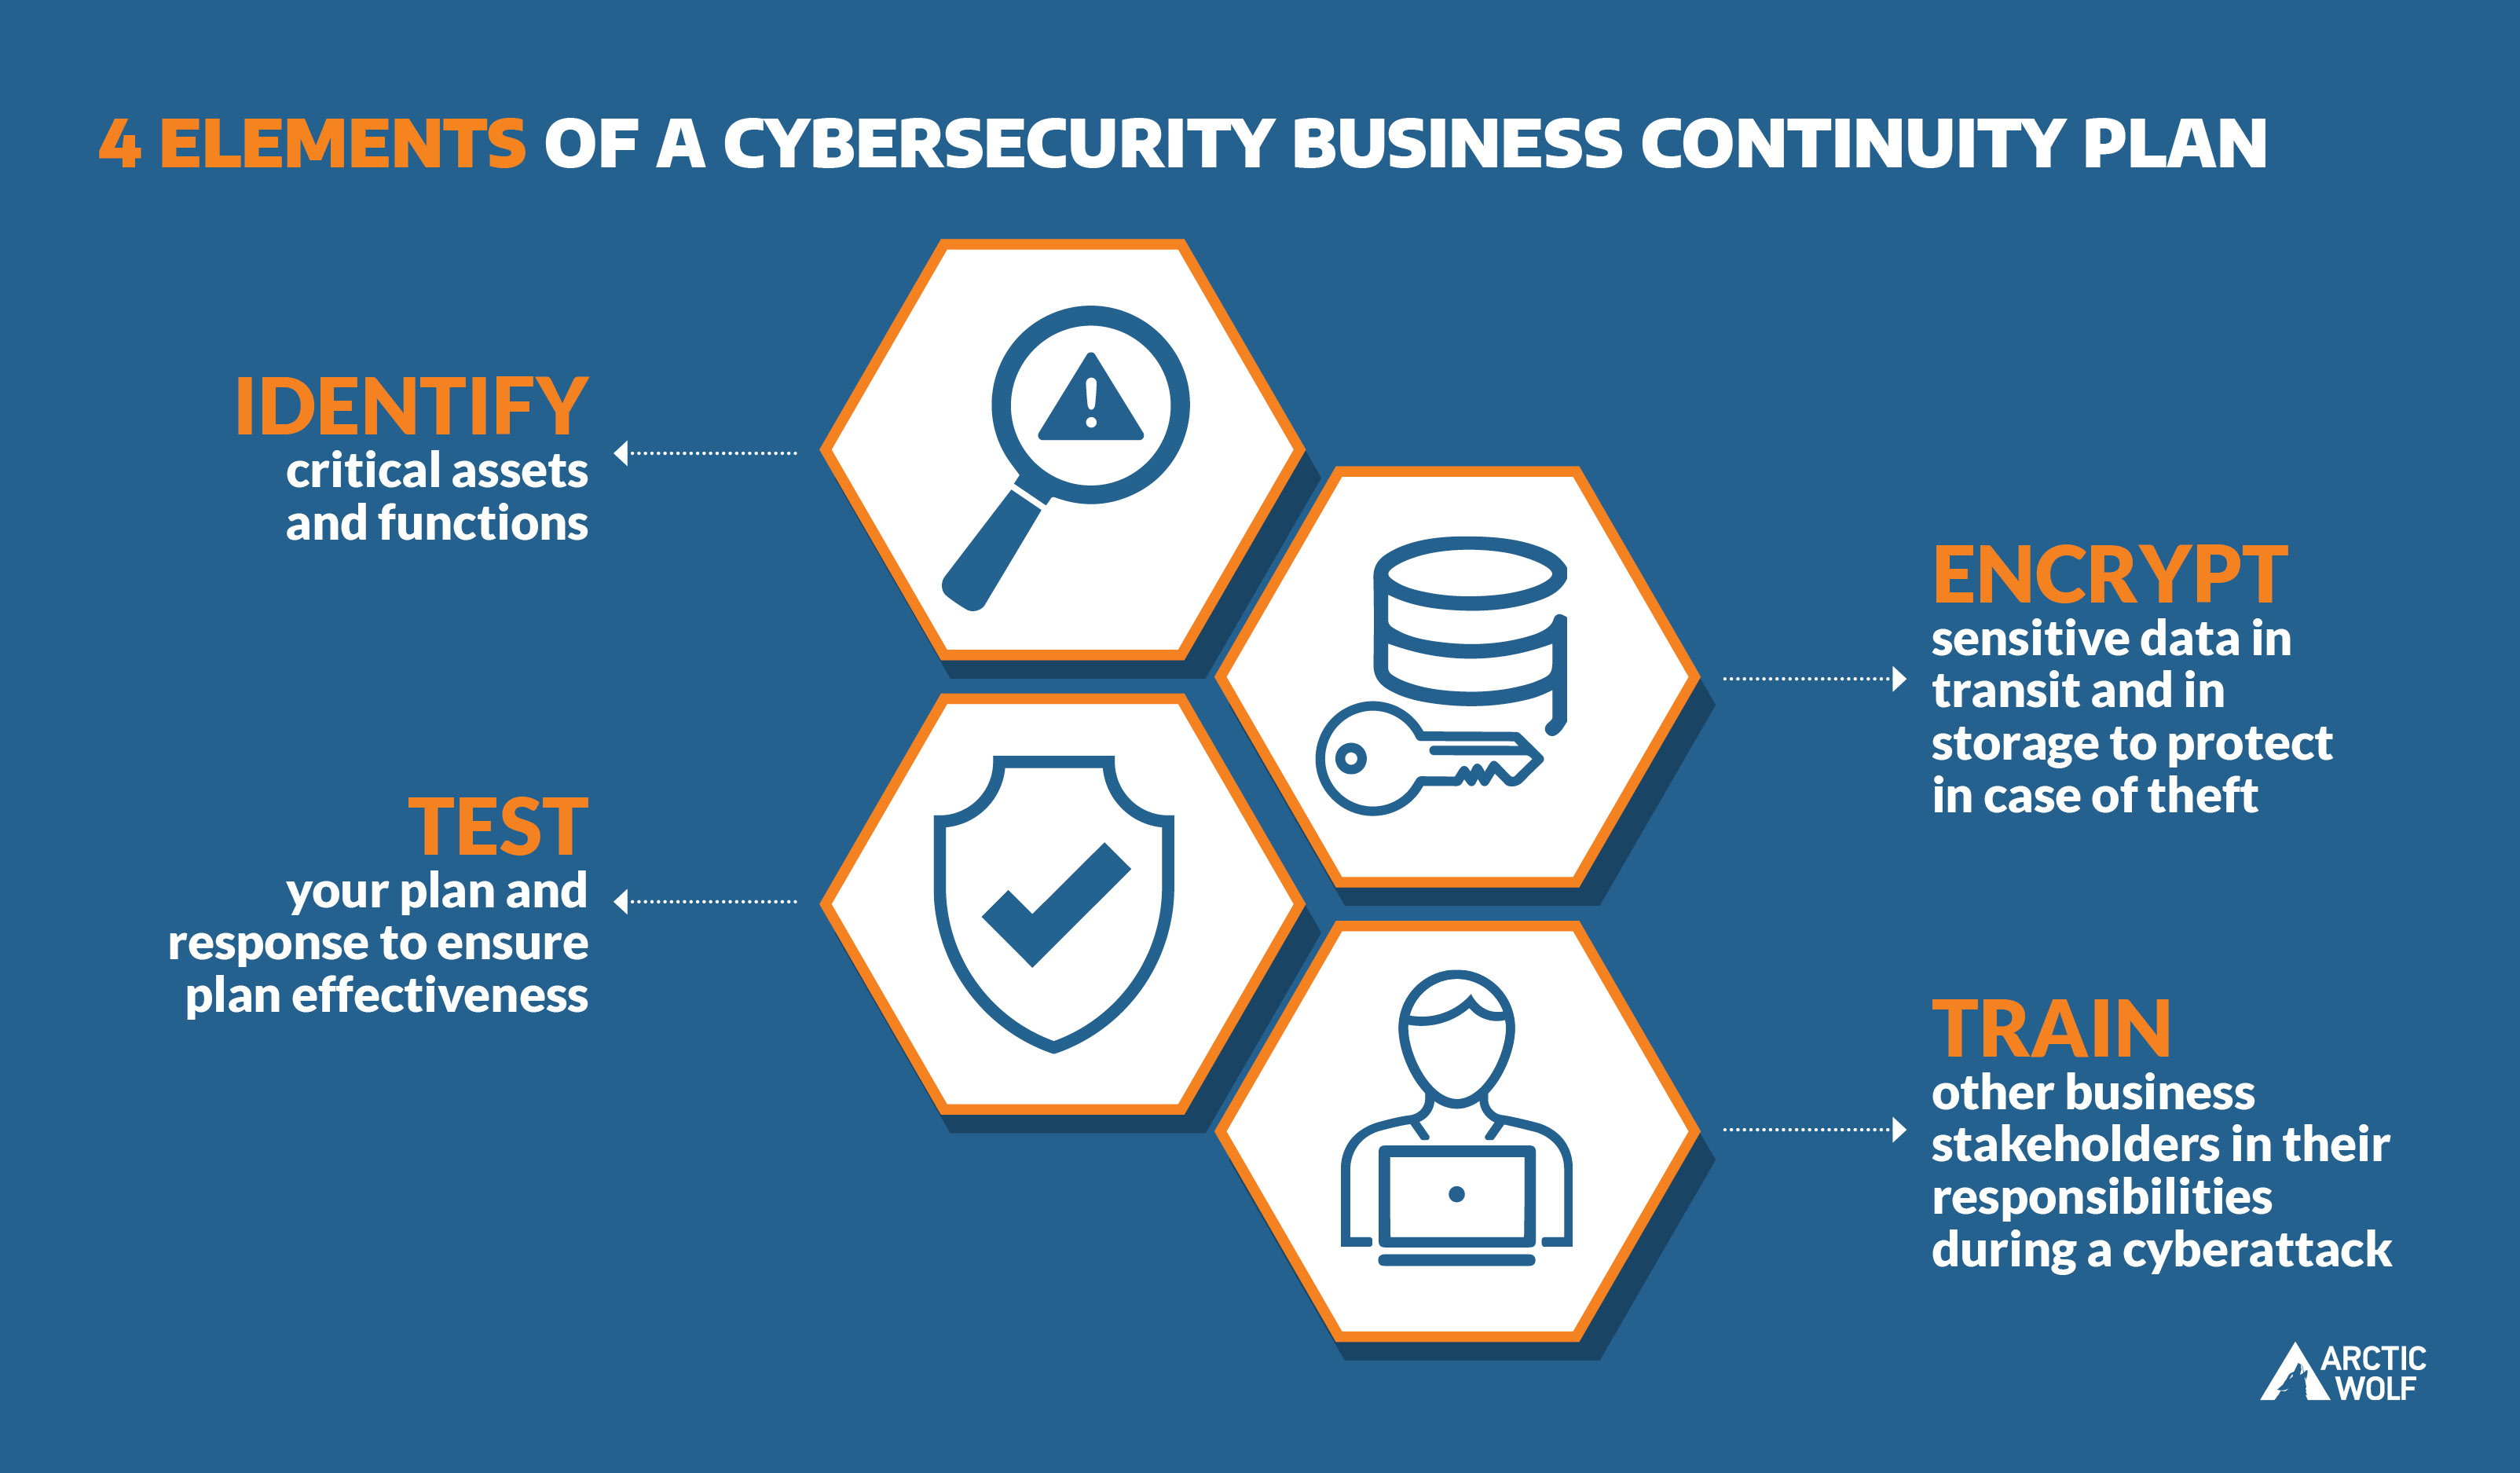 Custom graphic of Four Elements of a Cybersecurity Business continuity plan: "identity, test, encrypt, and train"